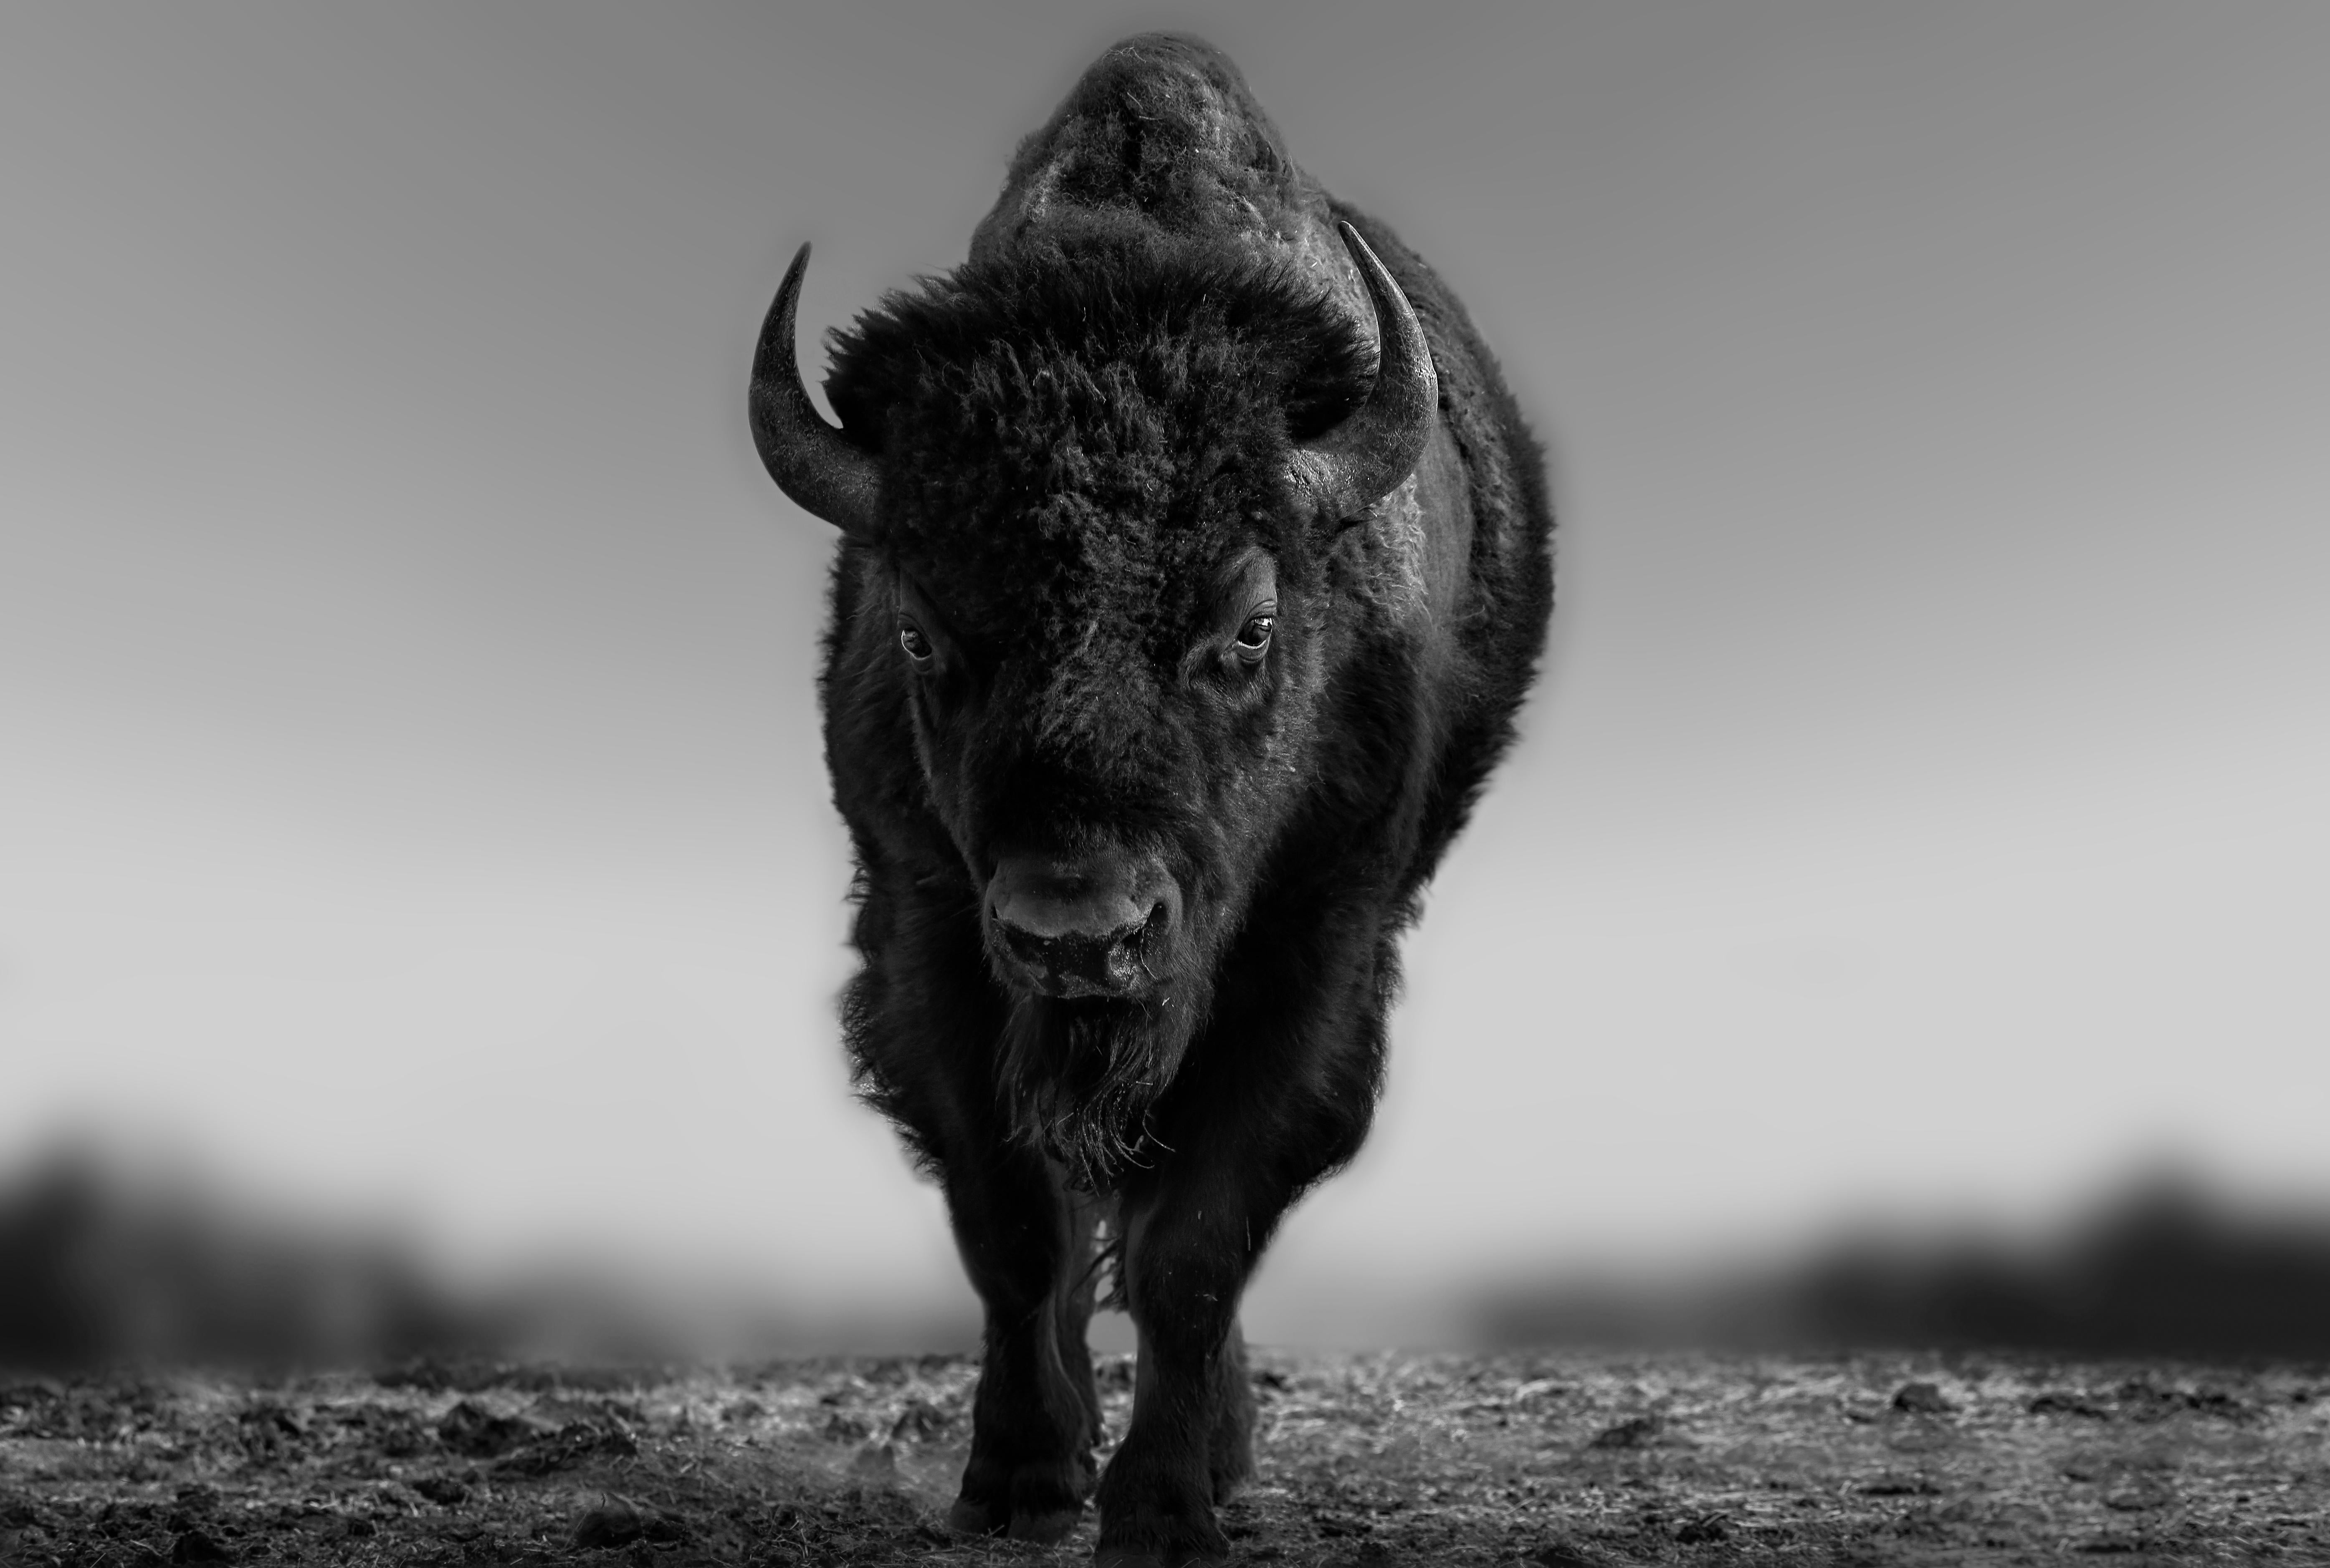 Shane Russeck Animal Print - The Beast 36x48 - Contemporary Black and White Photography of Bison